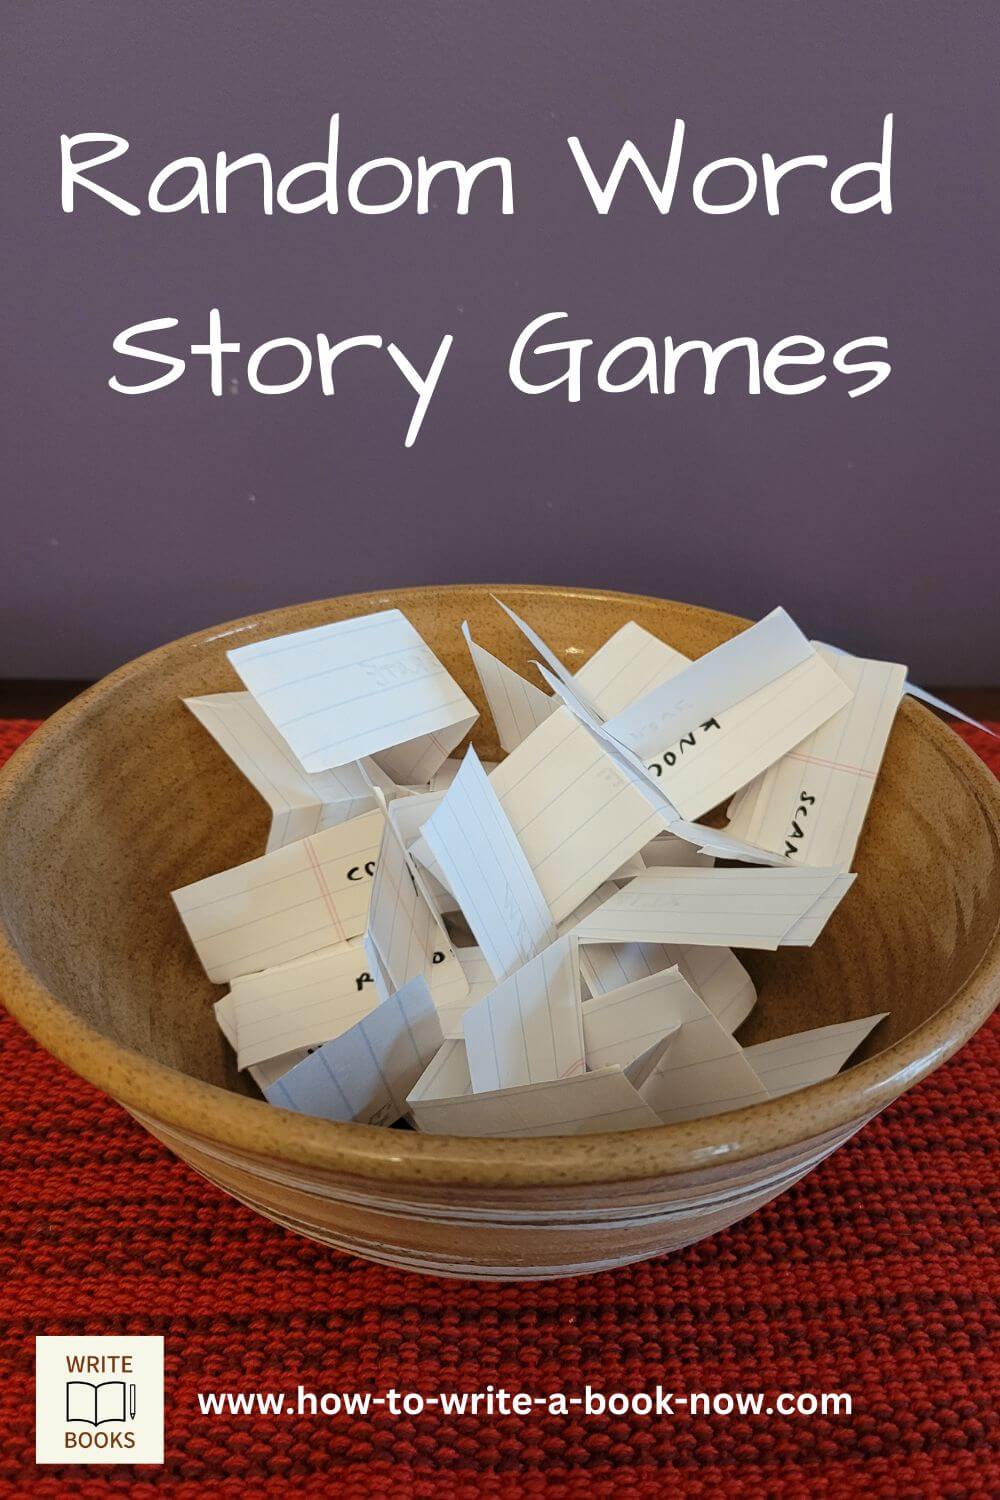 Random word story games are a fun way to generate story ideas on your own or with friends.